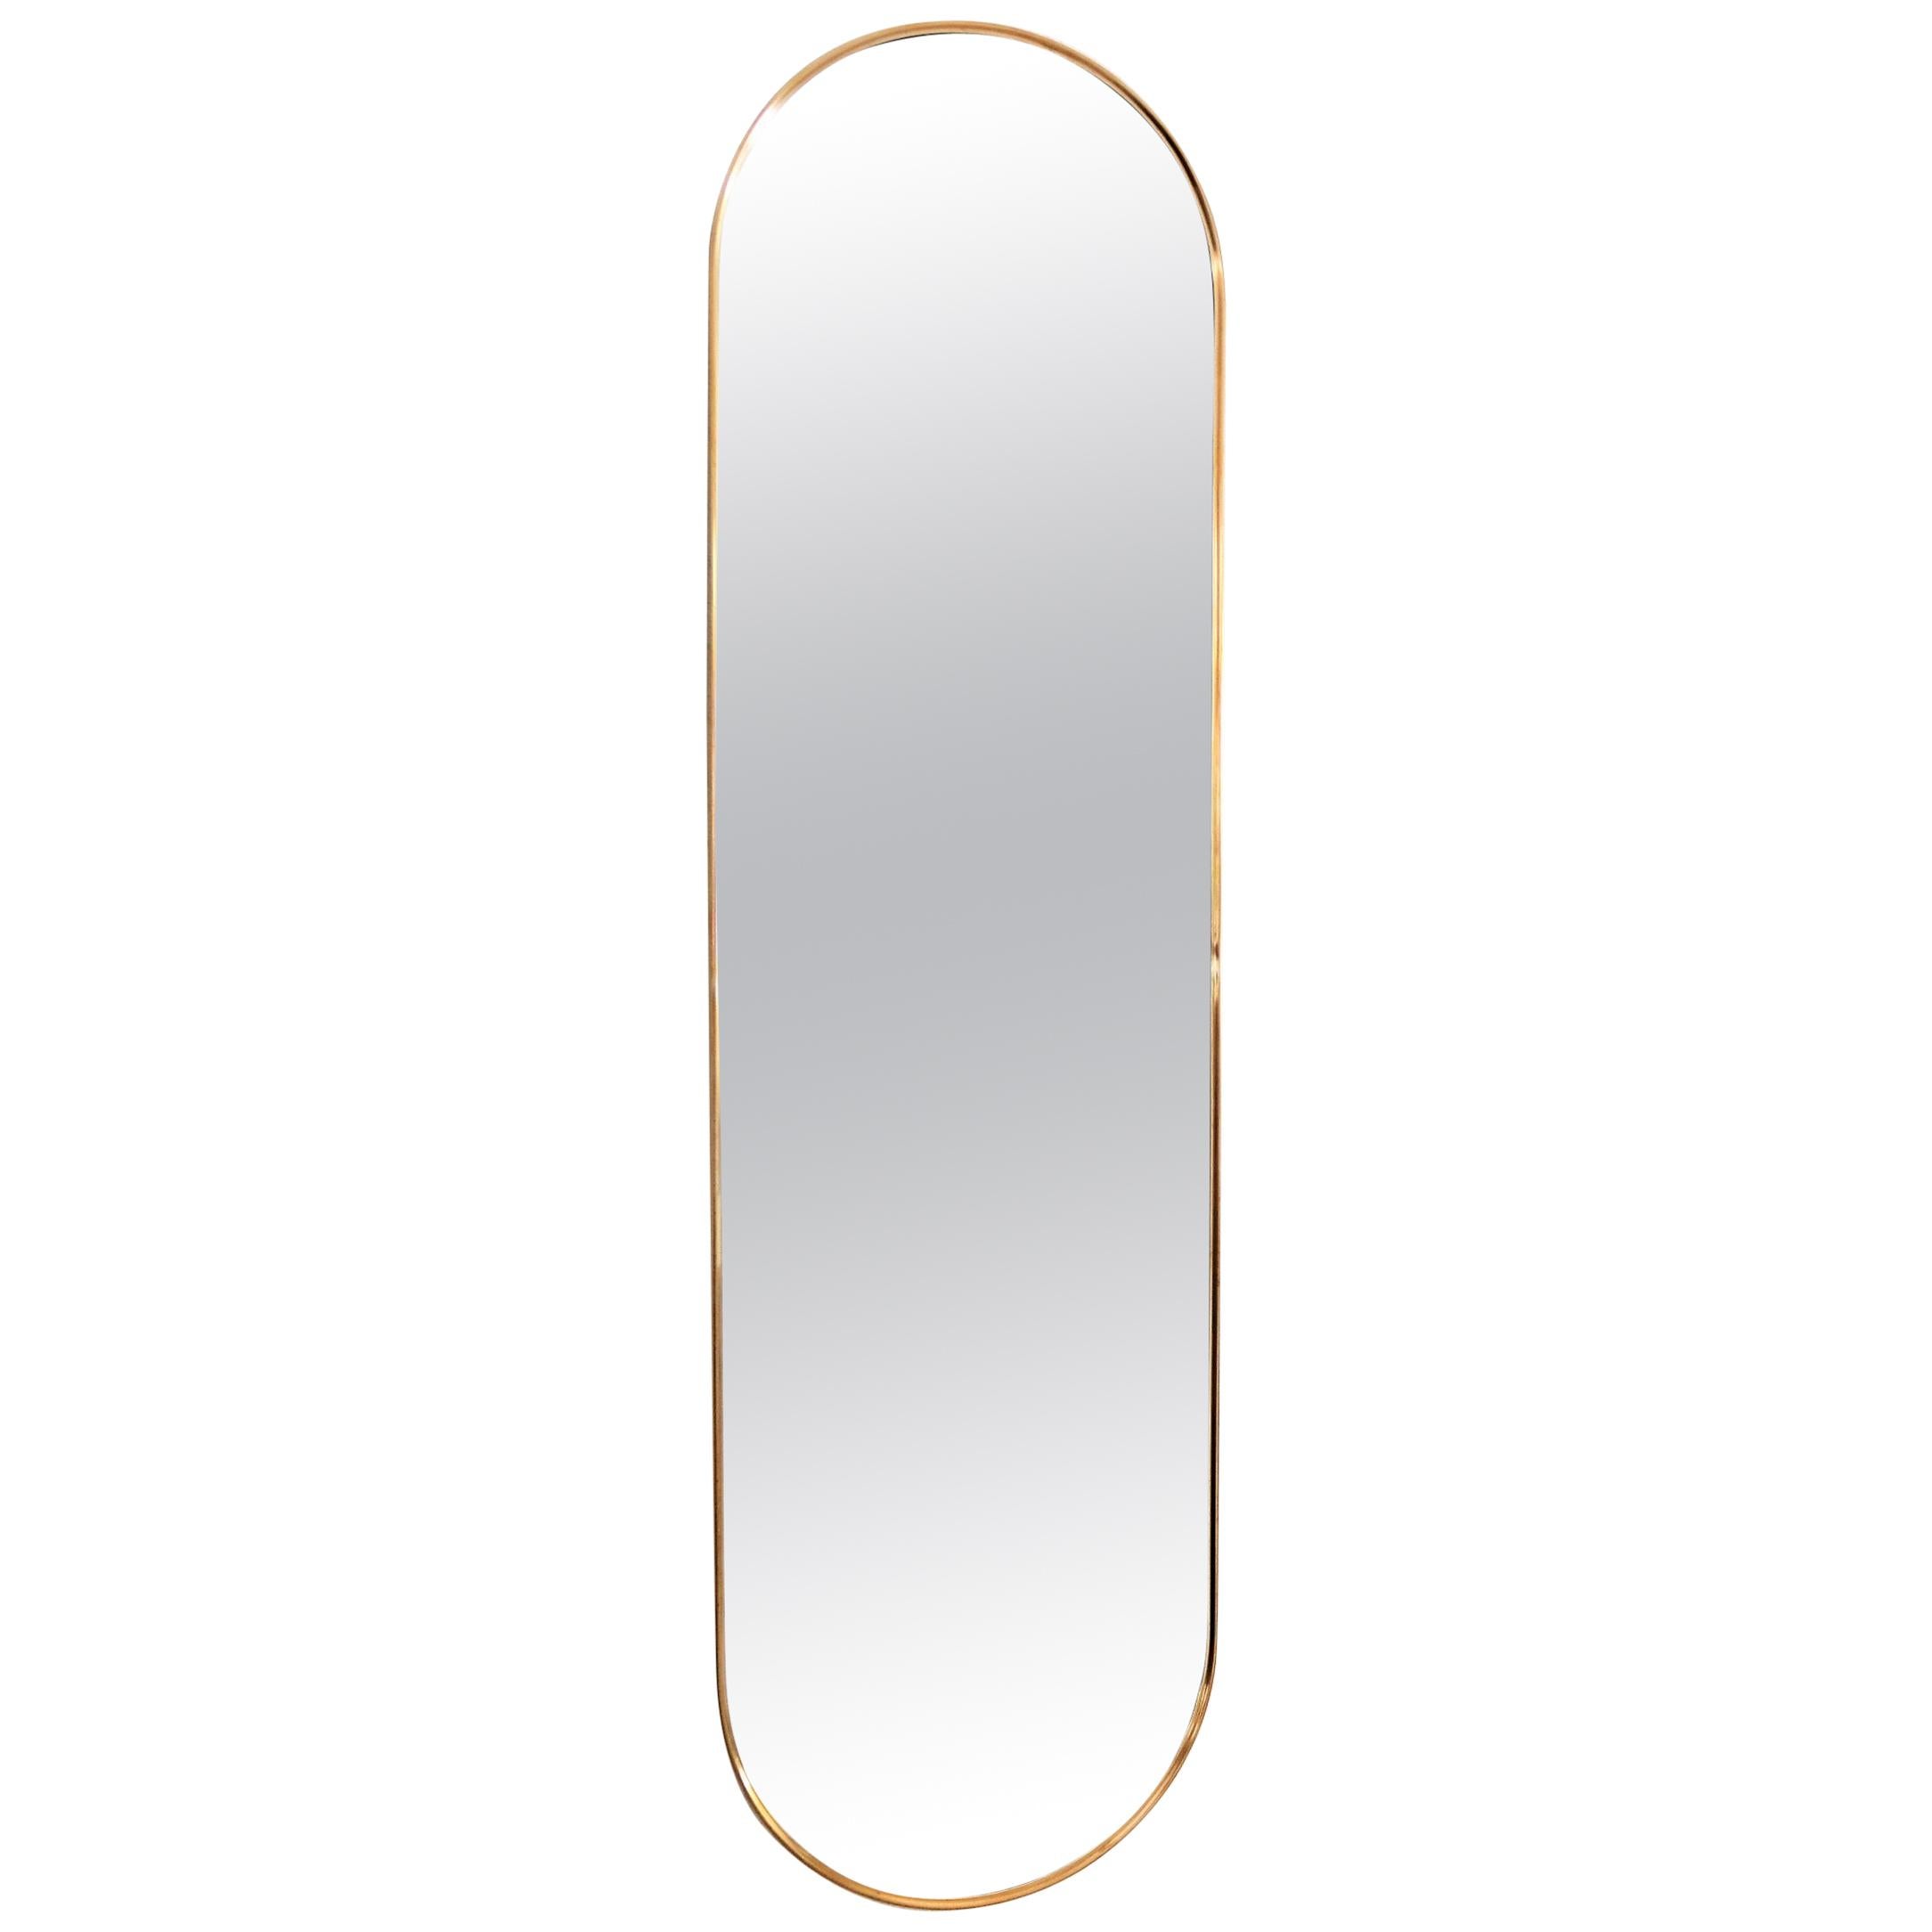 Italian Midcentury Oval Wall Mirror with Brass Frame, 1970s